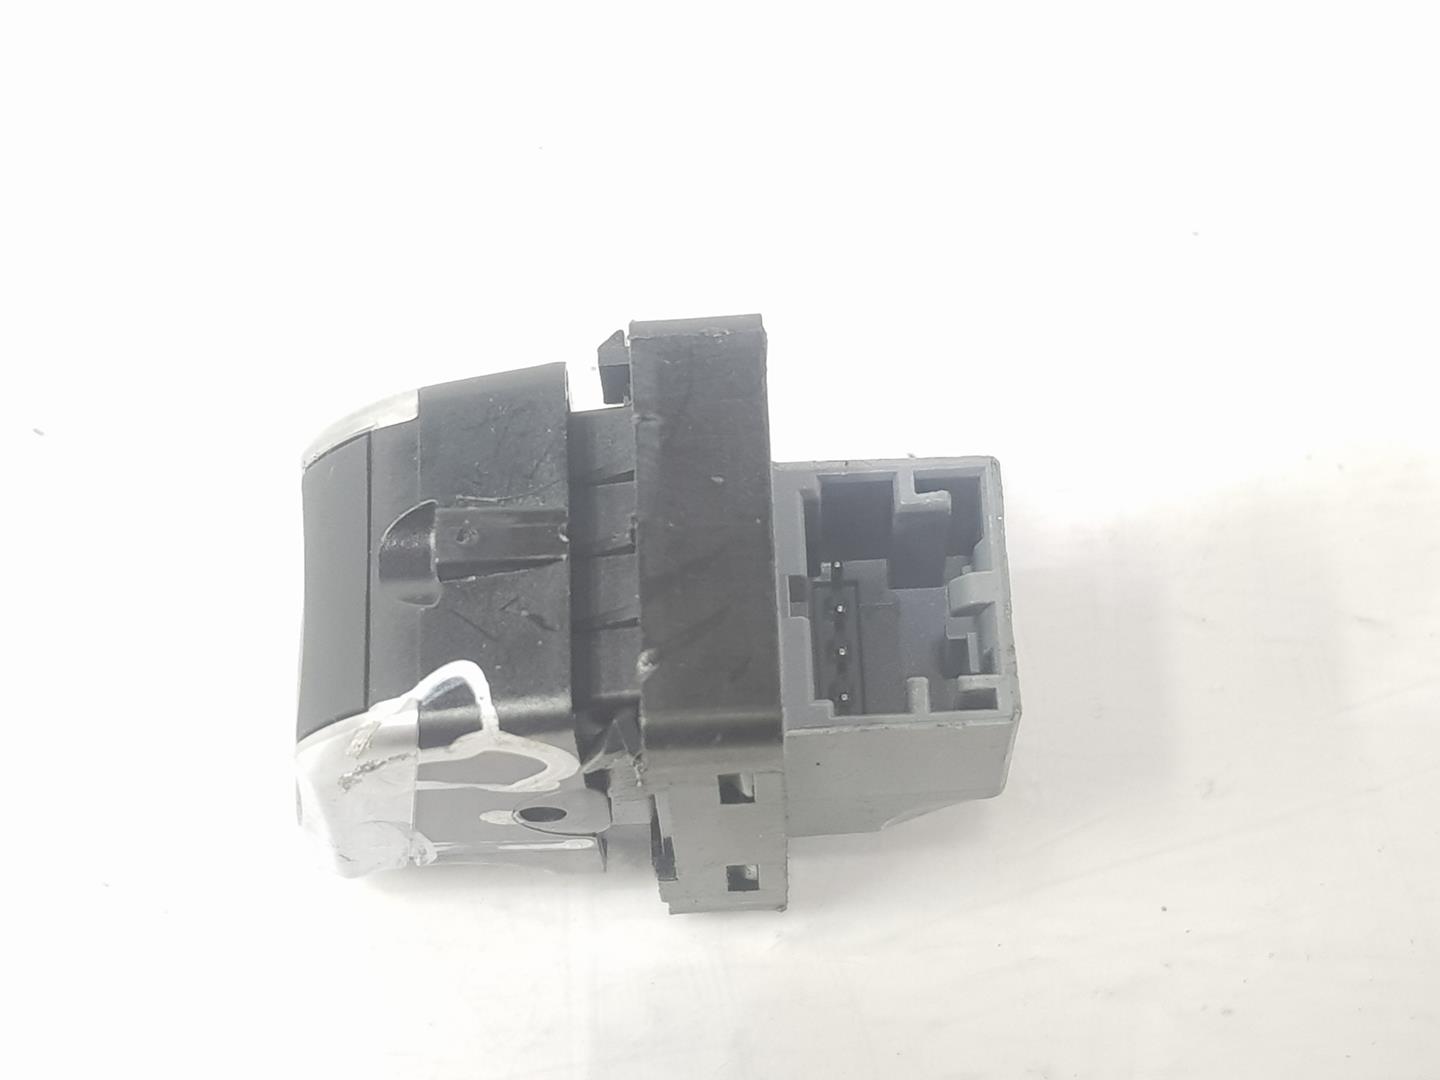 AUDI A7 C7/4G (2010-2020) Rear Right Door Window Control Switch 4H0959855A, 4H0959855A 19761569